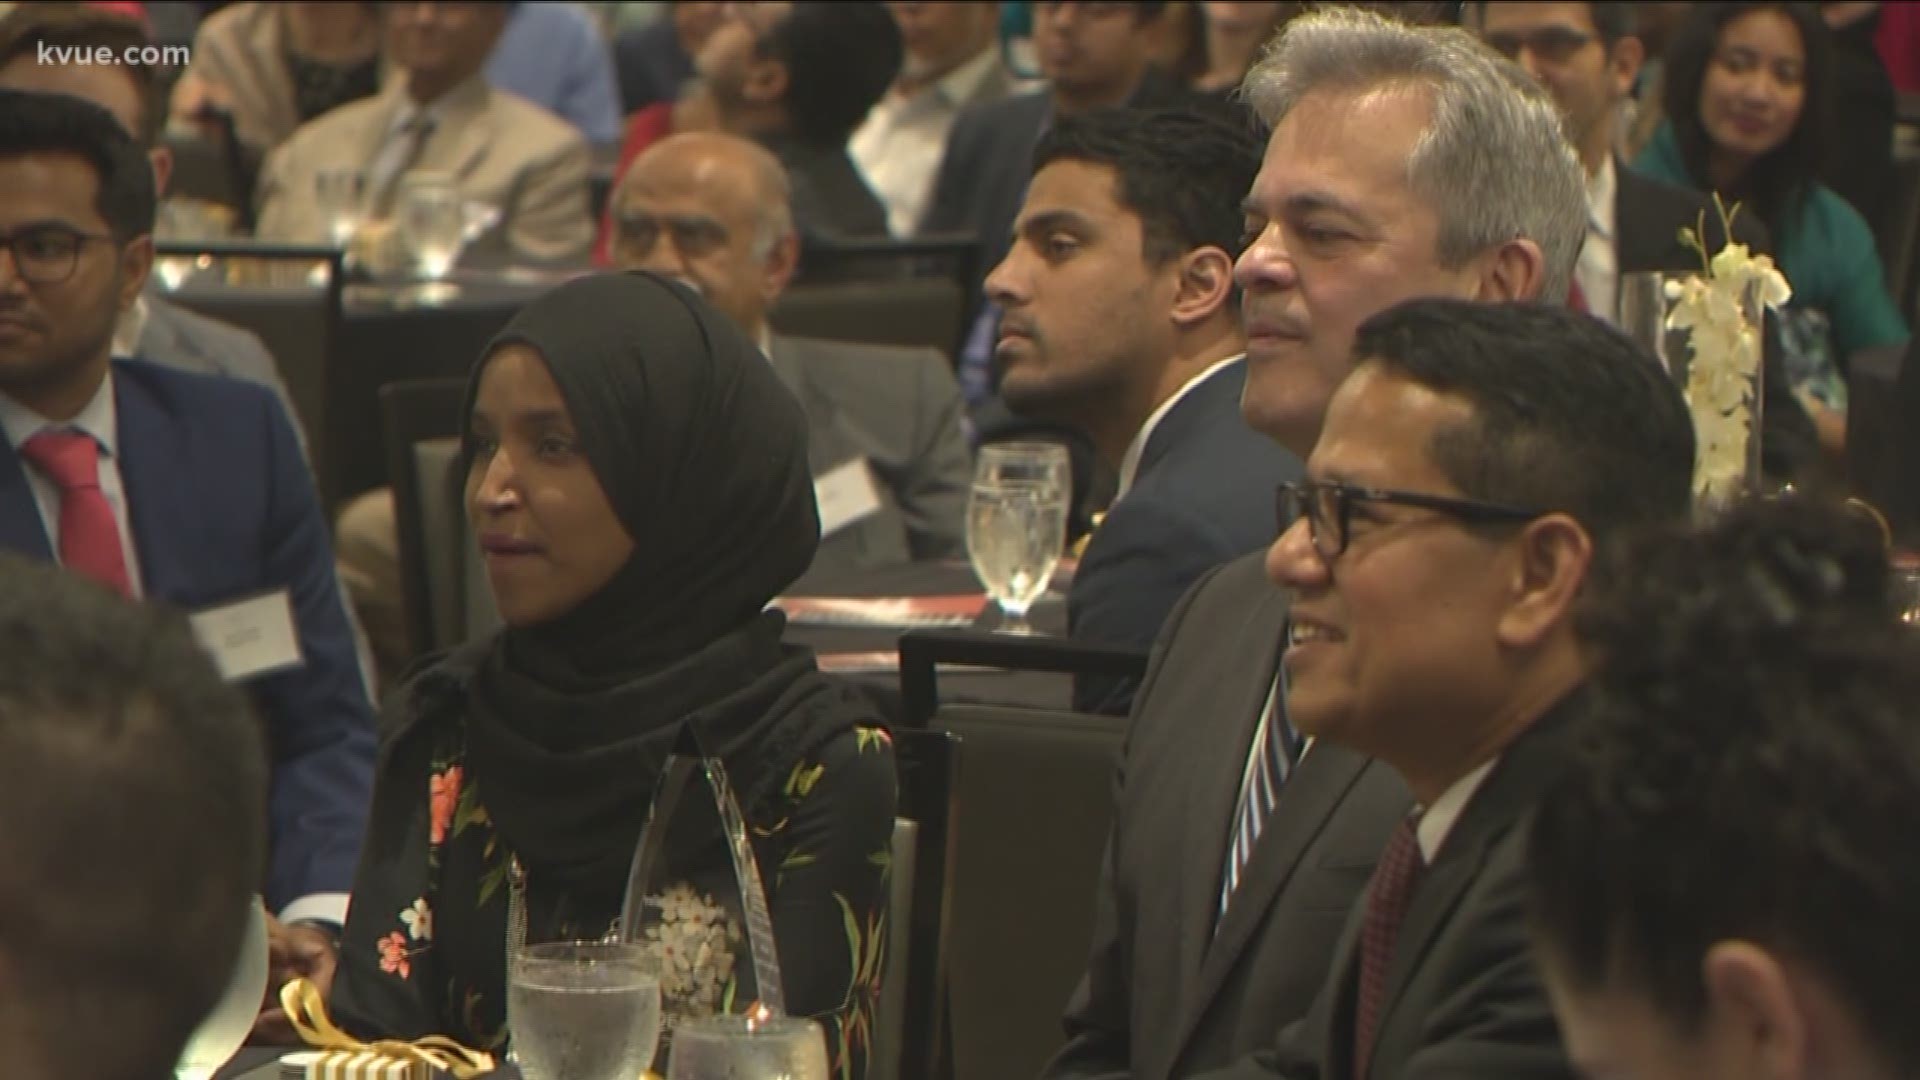 Despite pushback, Austin's mayor attended the City Wide Iftar Dinner that featured Congresswoman Ilhan Omar.